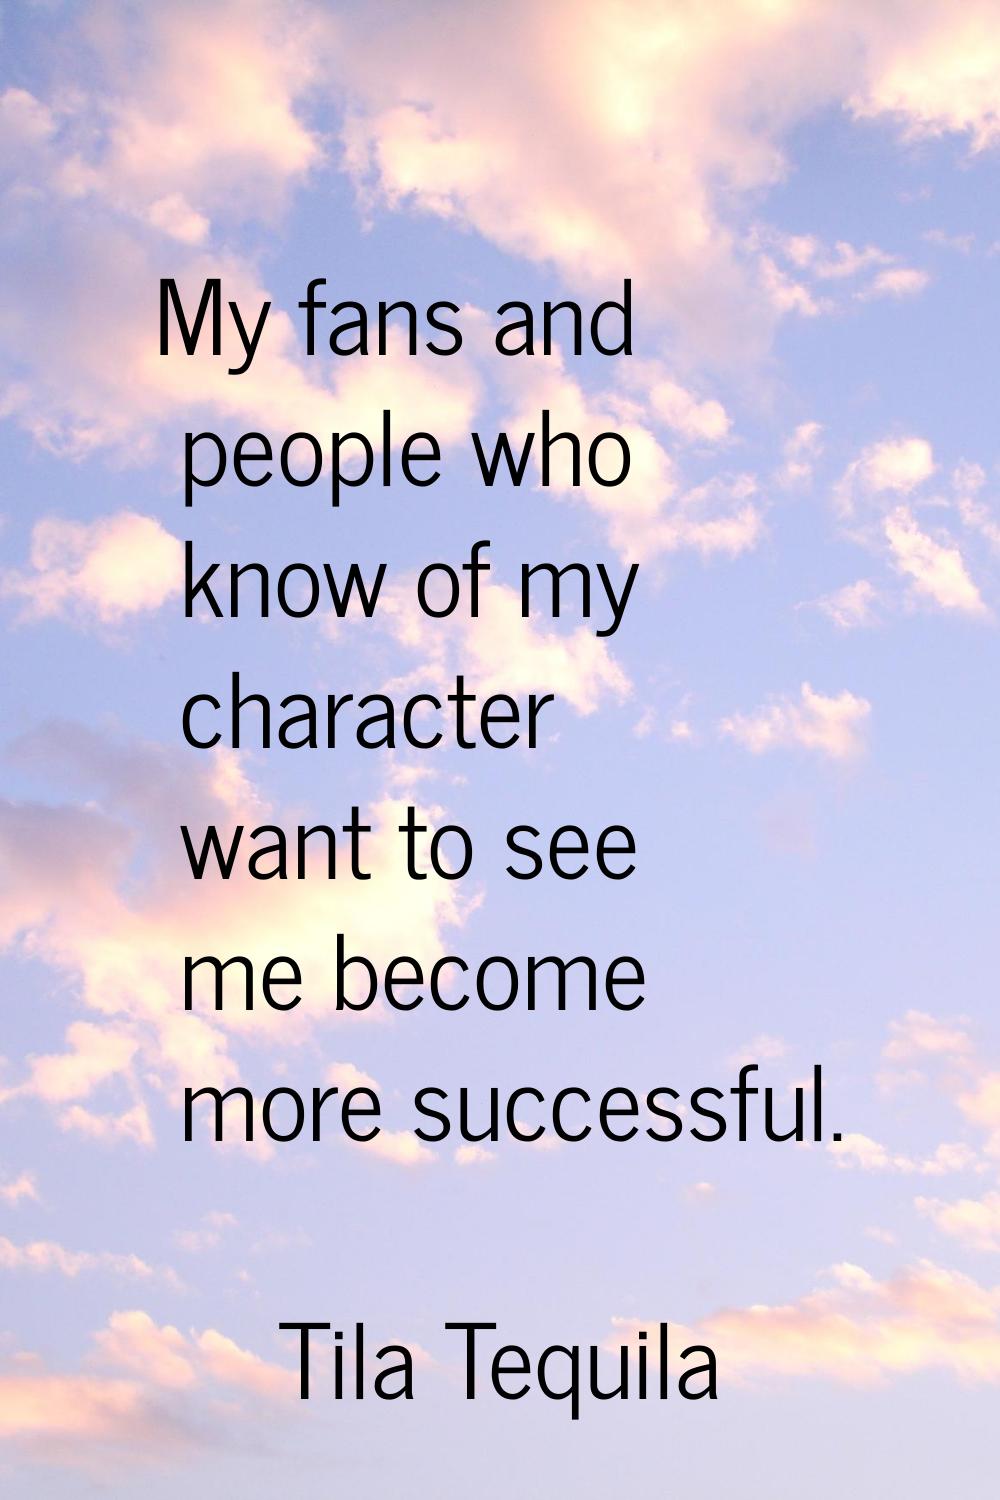 My fans and people who know of my character want to see me become more successful.